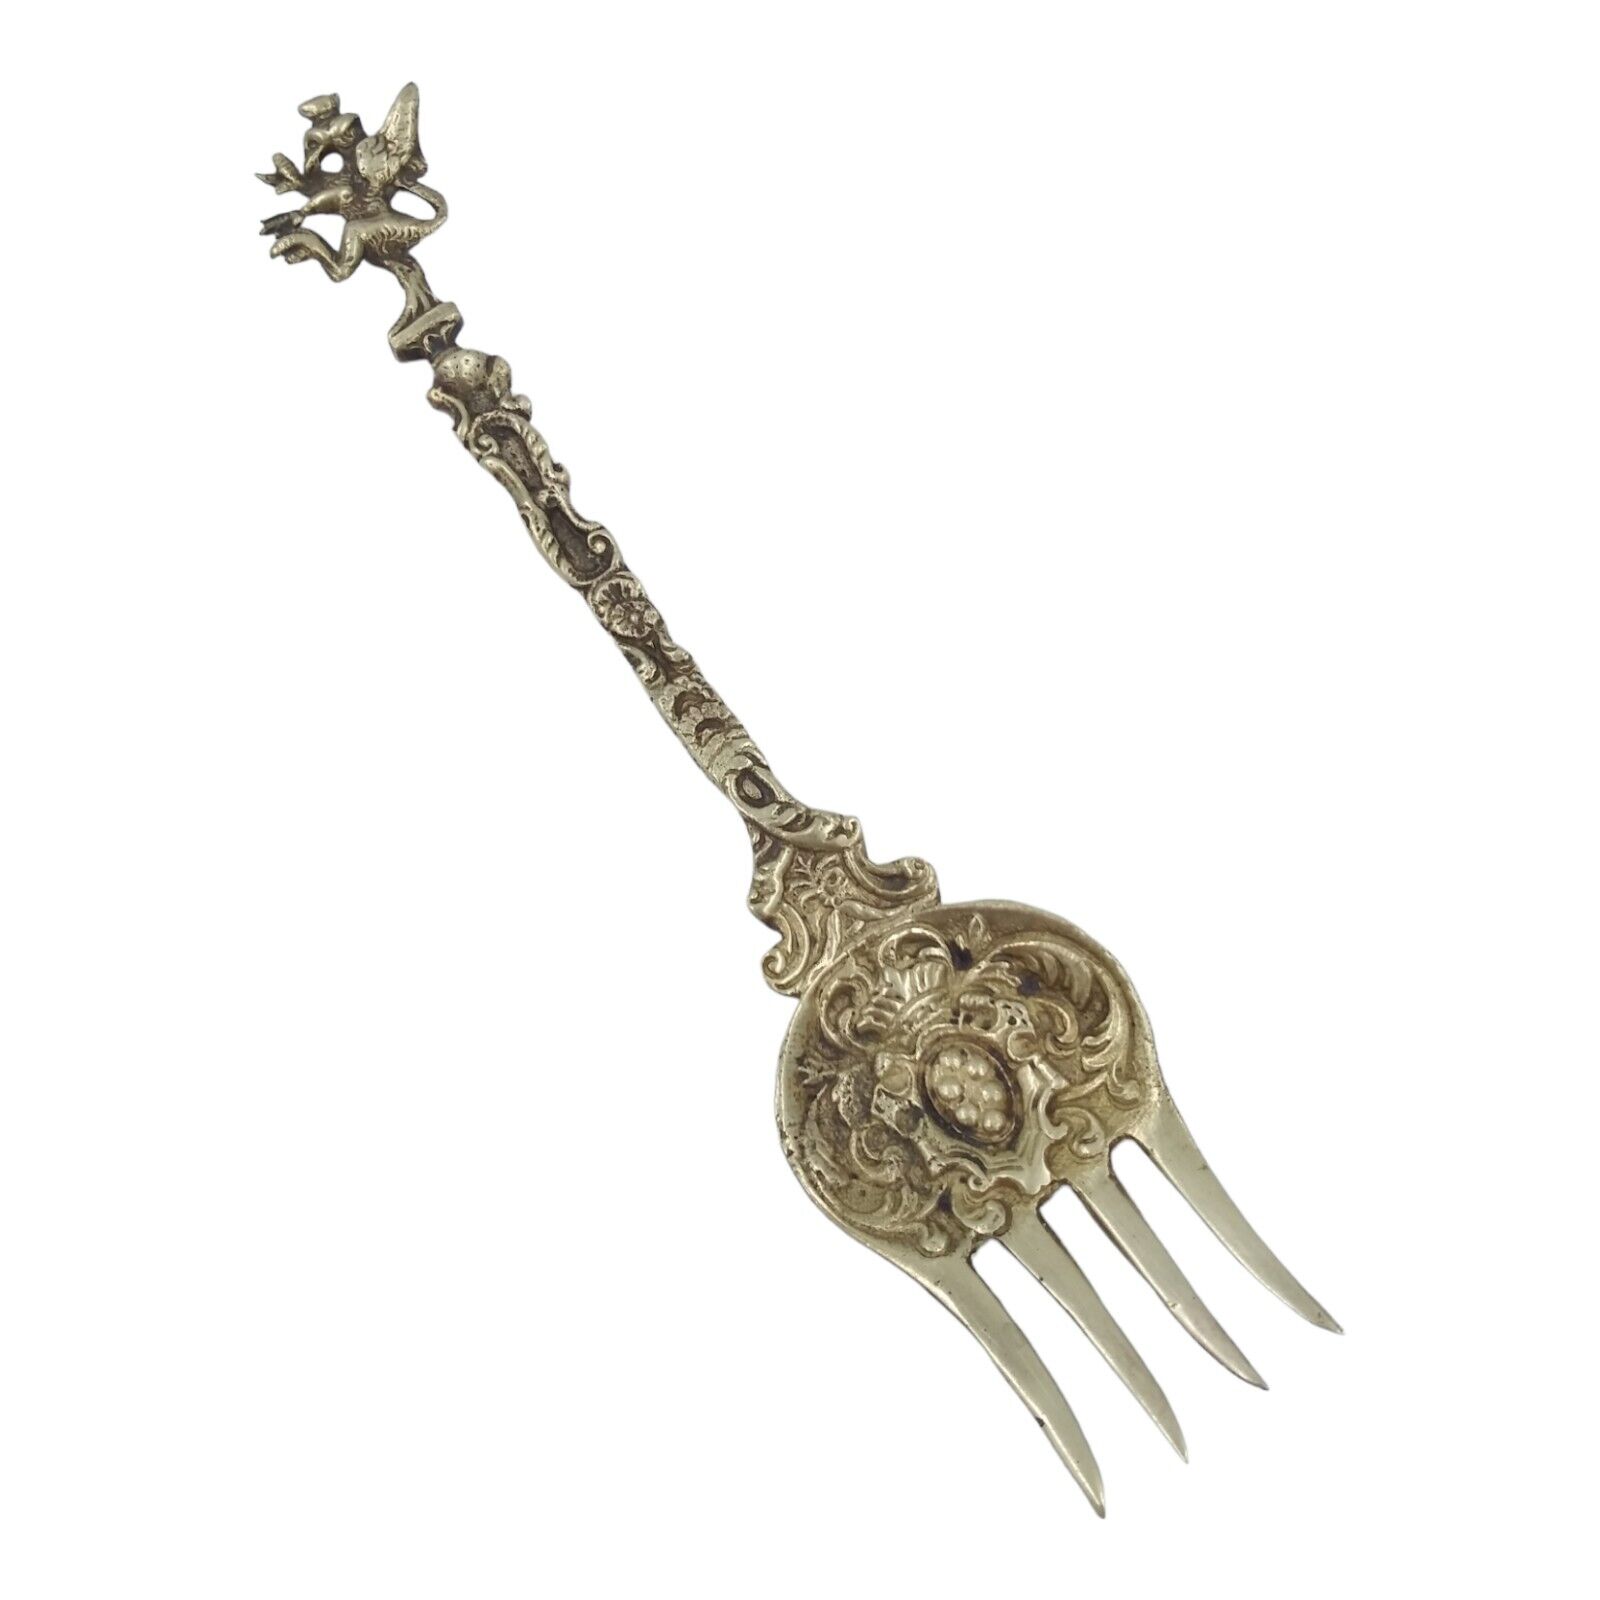 Vintage Ornate Griffin Souvenir Fork Collectible Italy